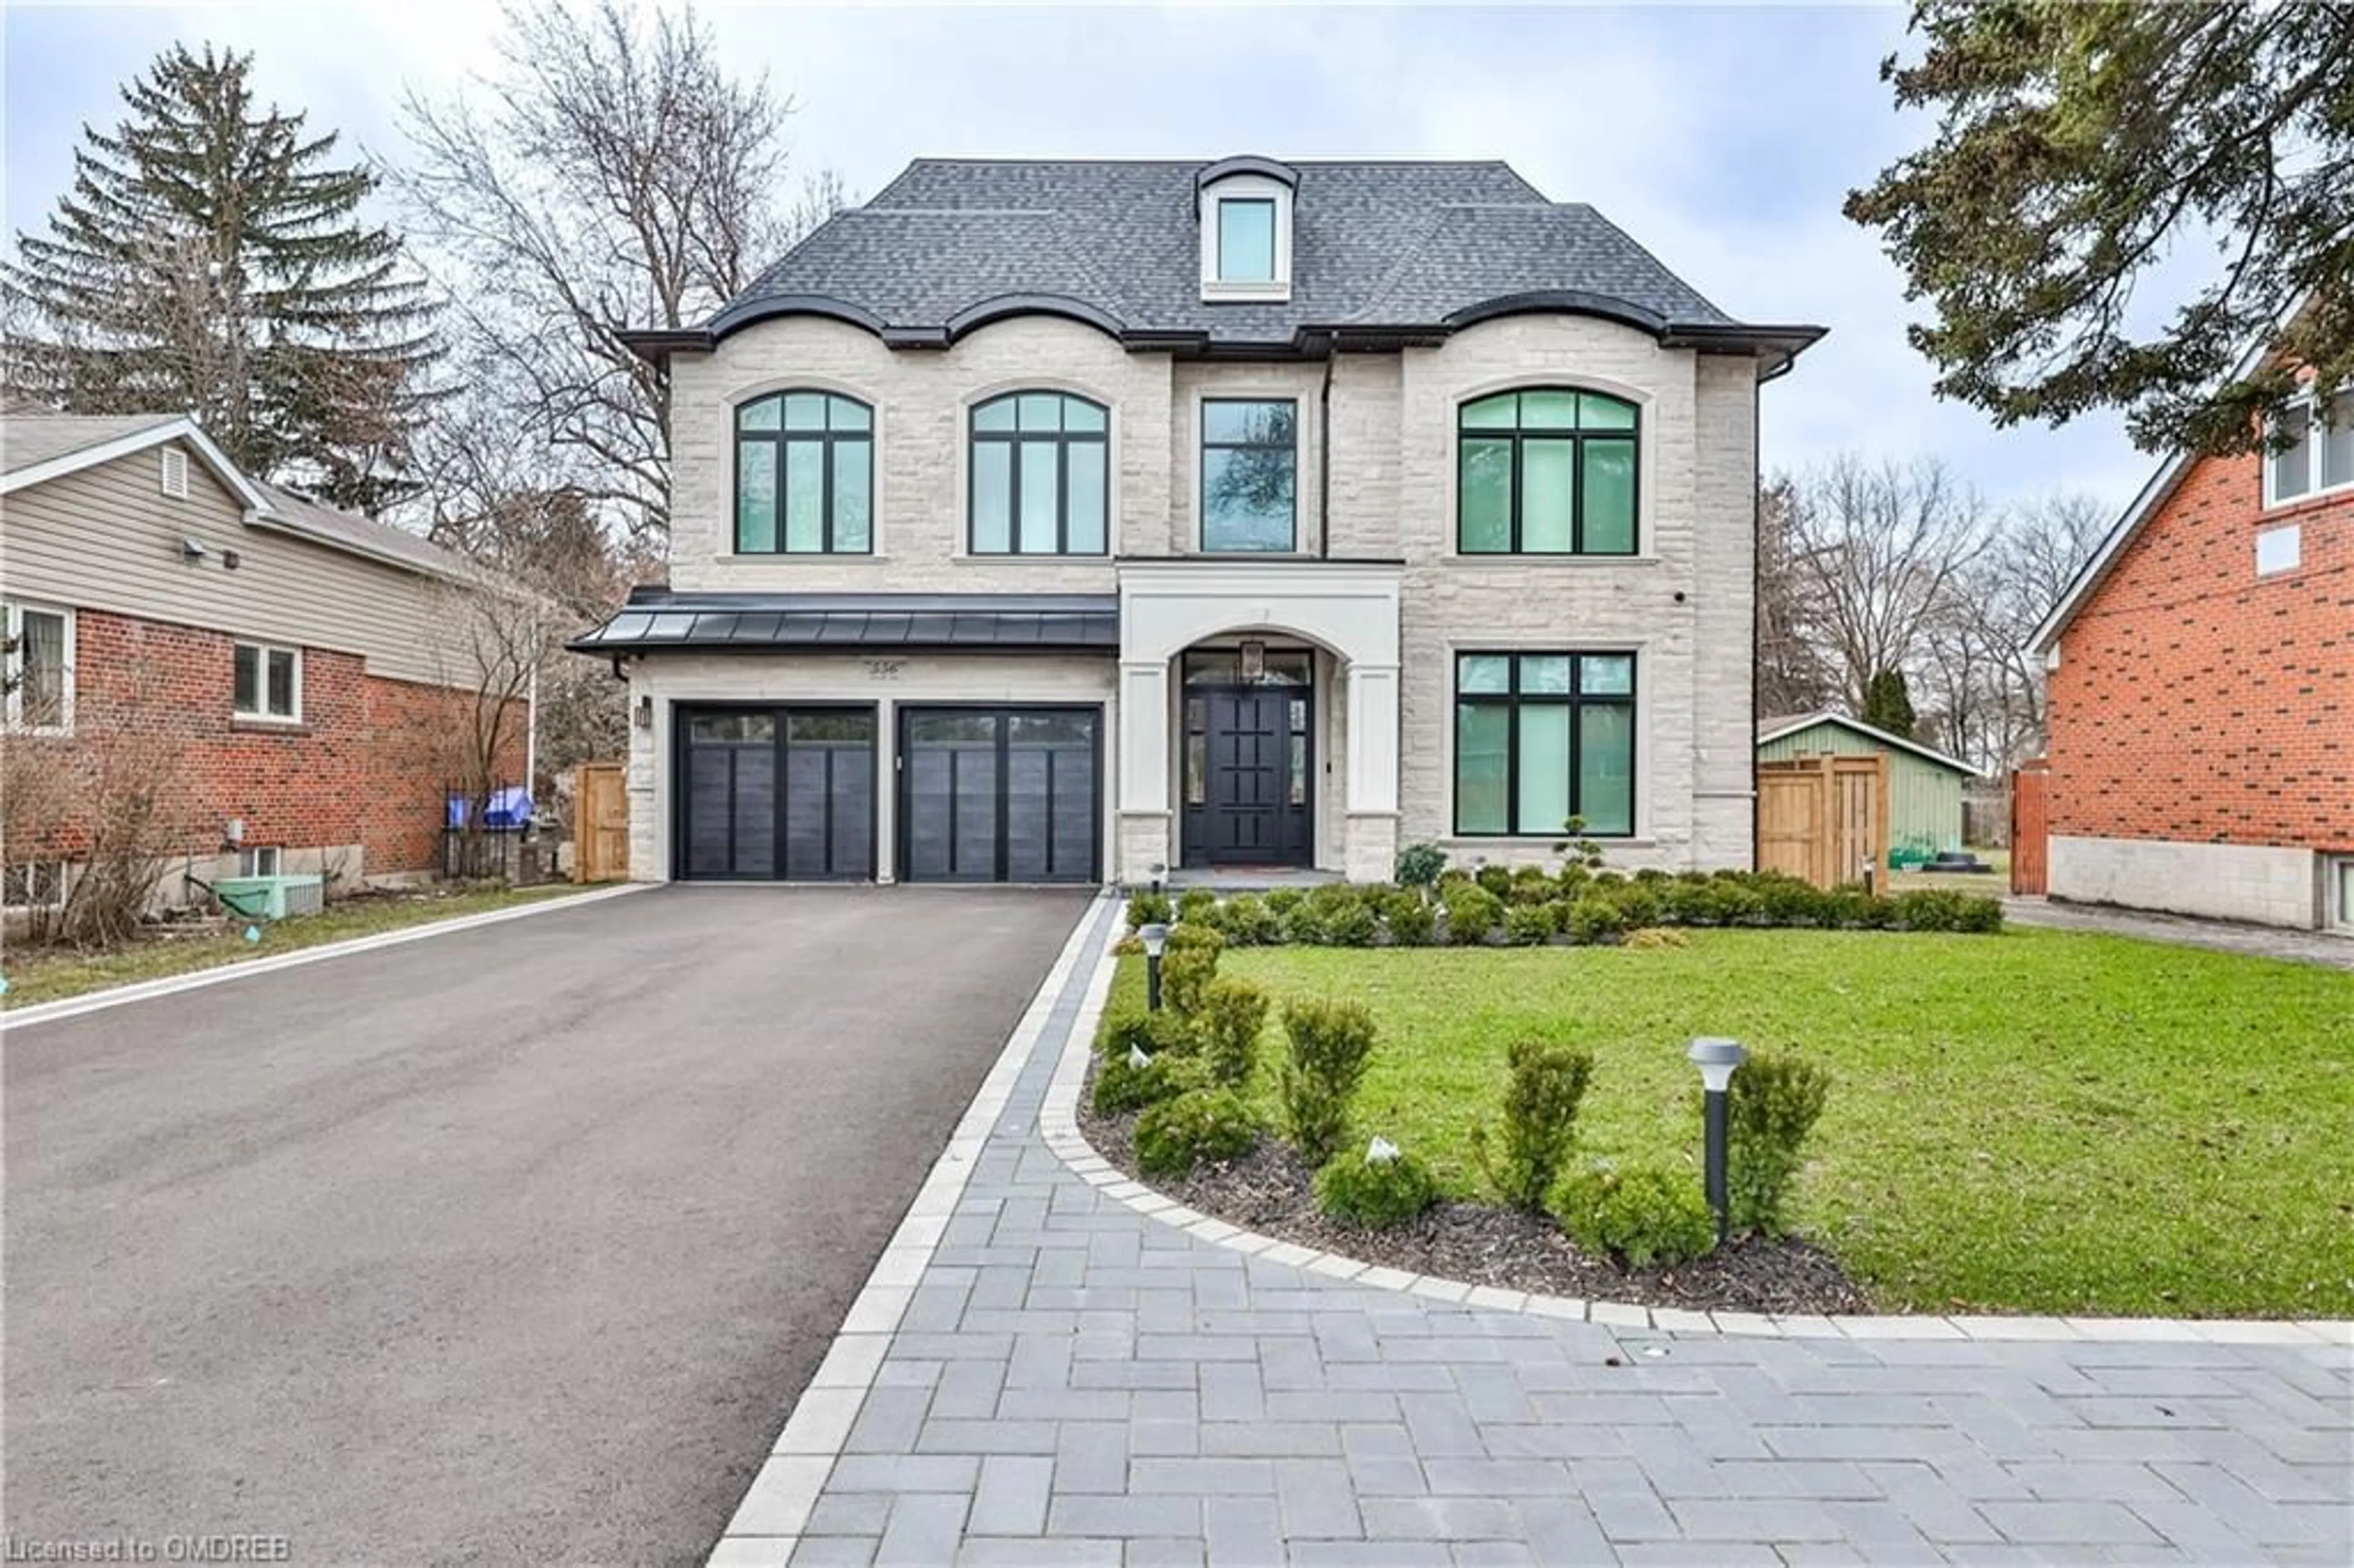 Home with brick exterior material for 556 Fourth Line, Oakville Ontario L6L 5A7